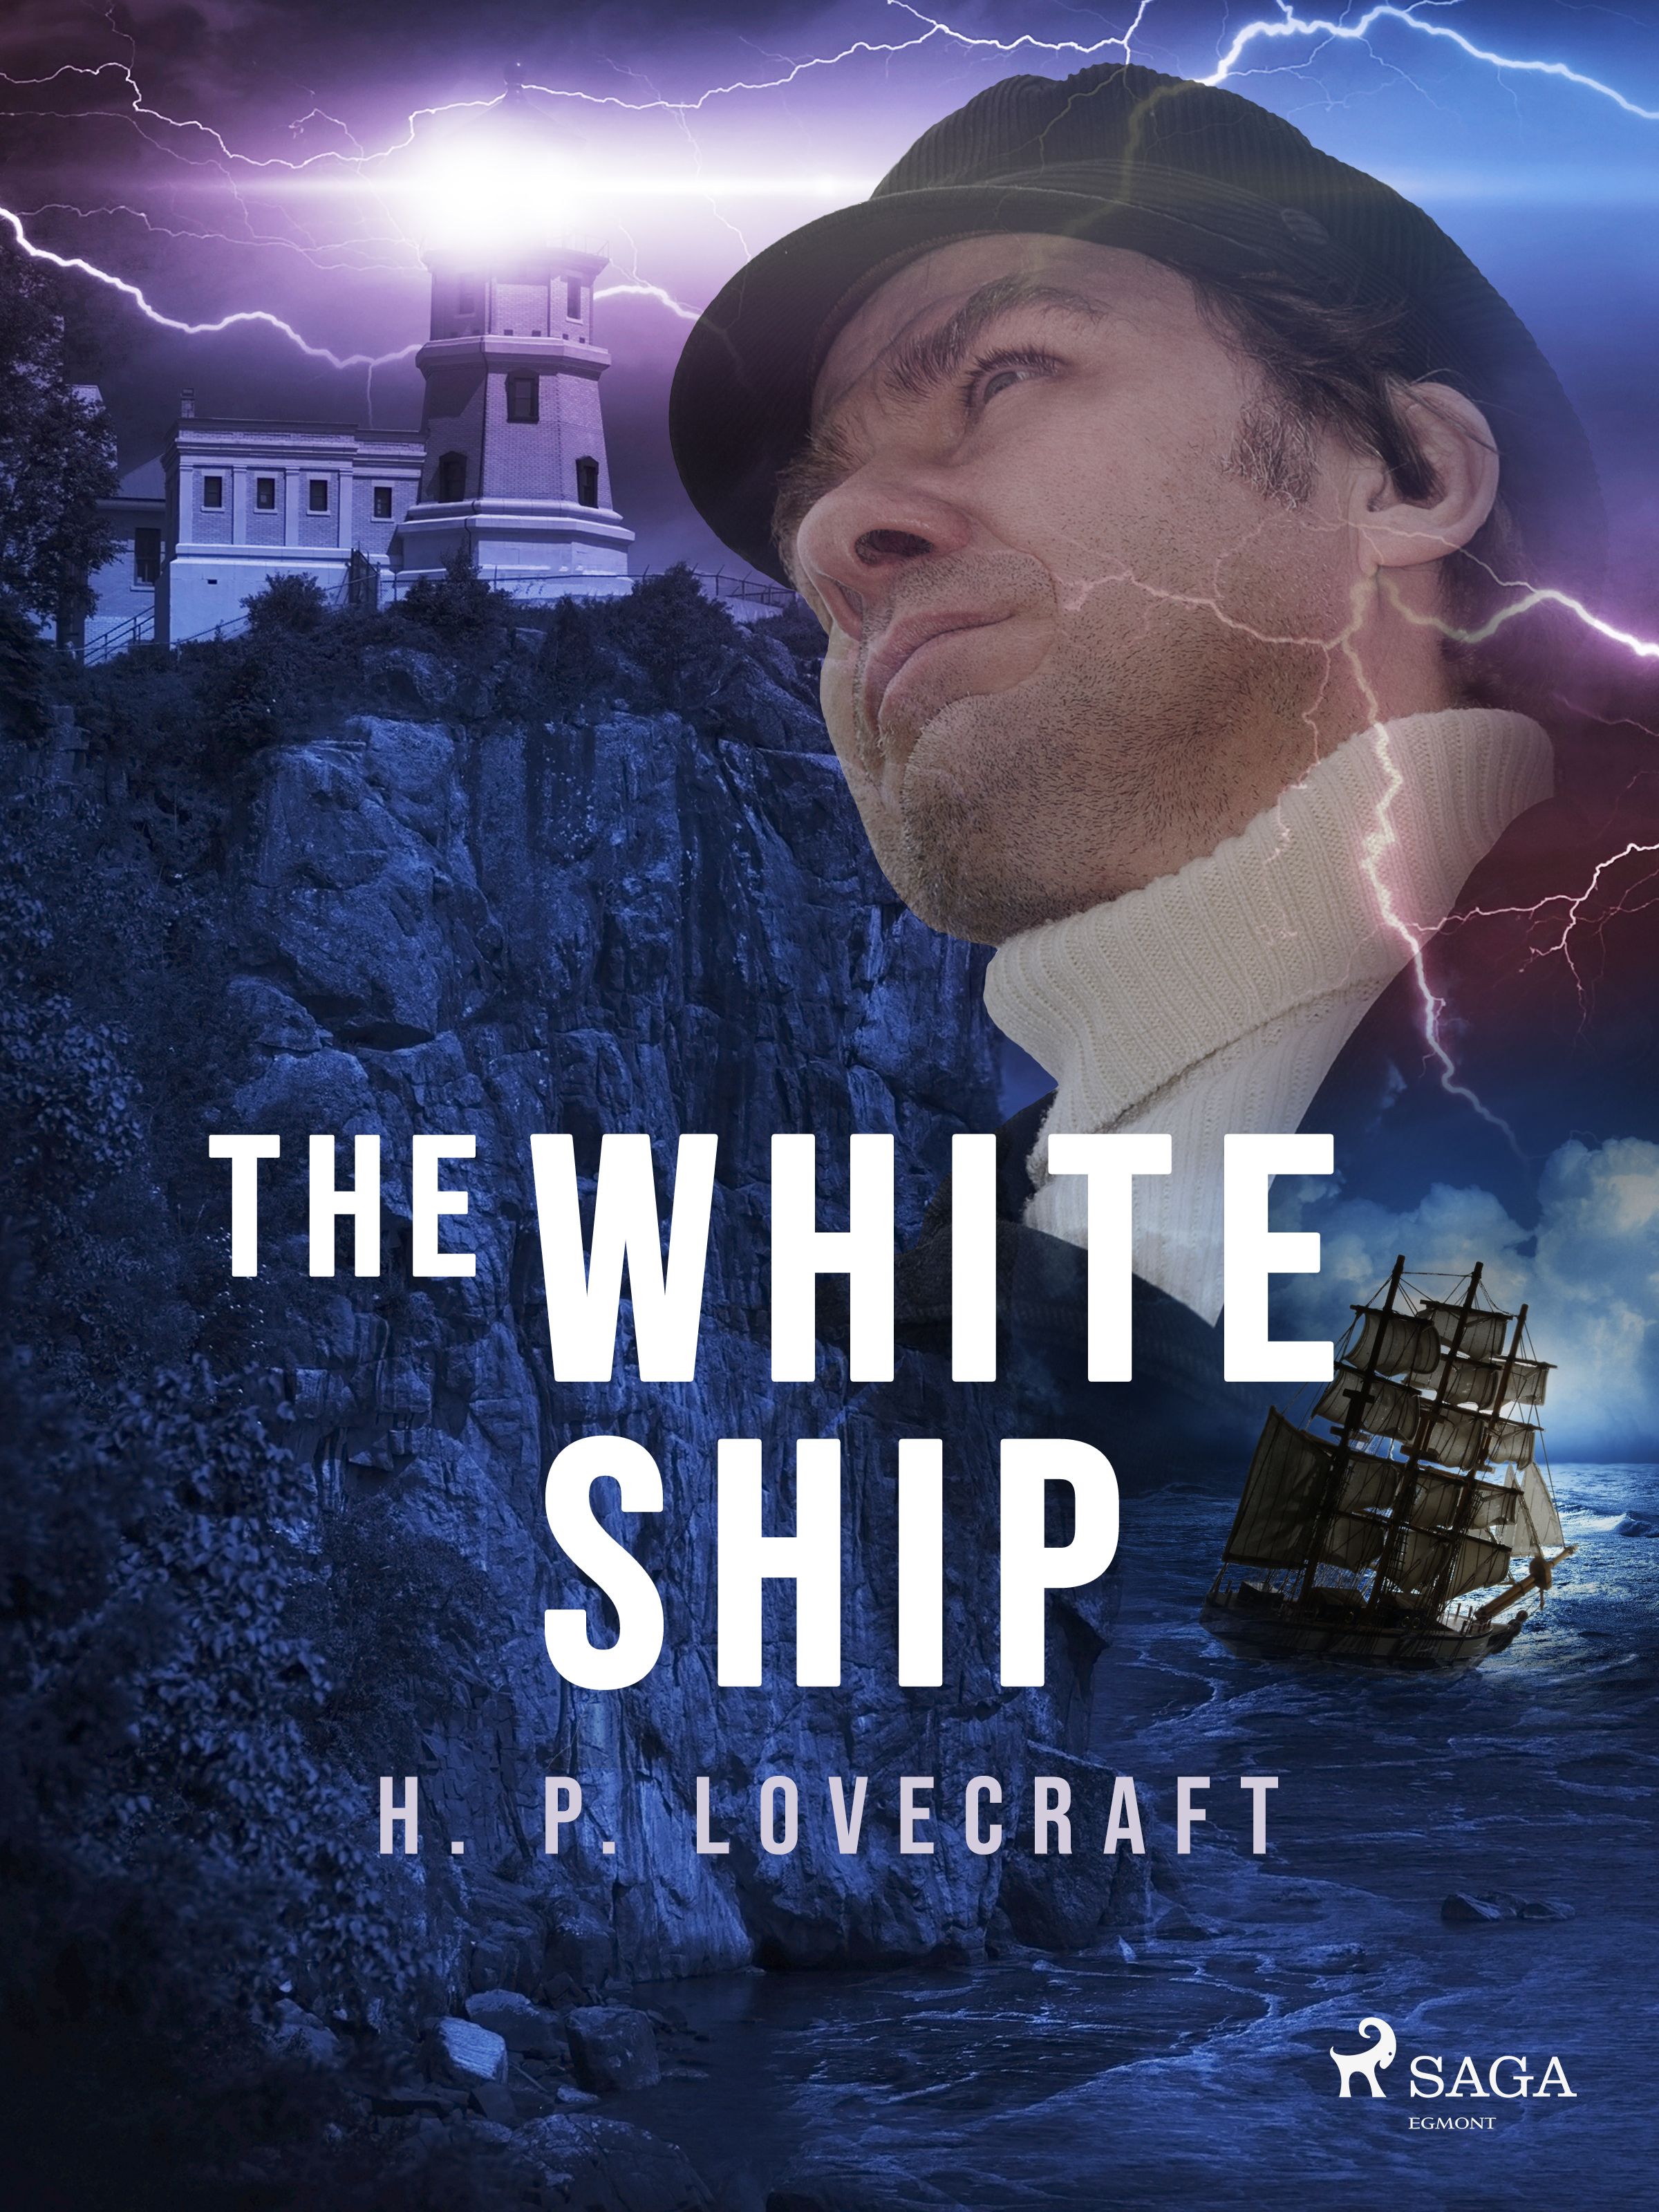 The White Ship, eBook by H. P. Lovecraft